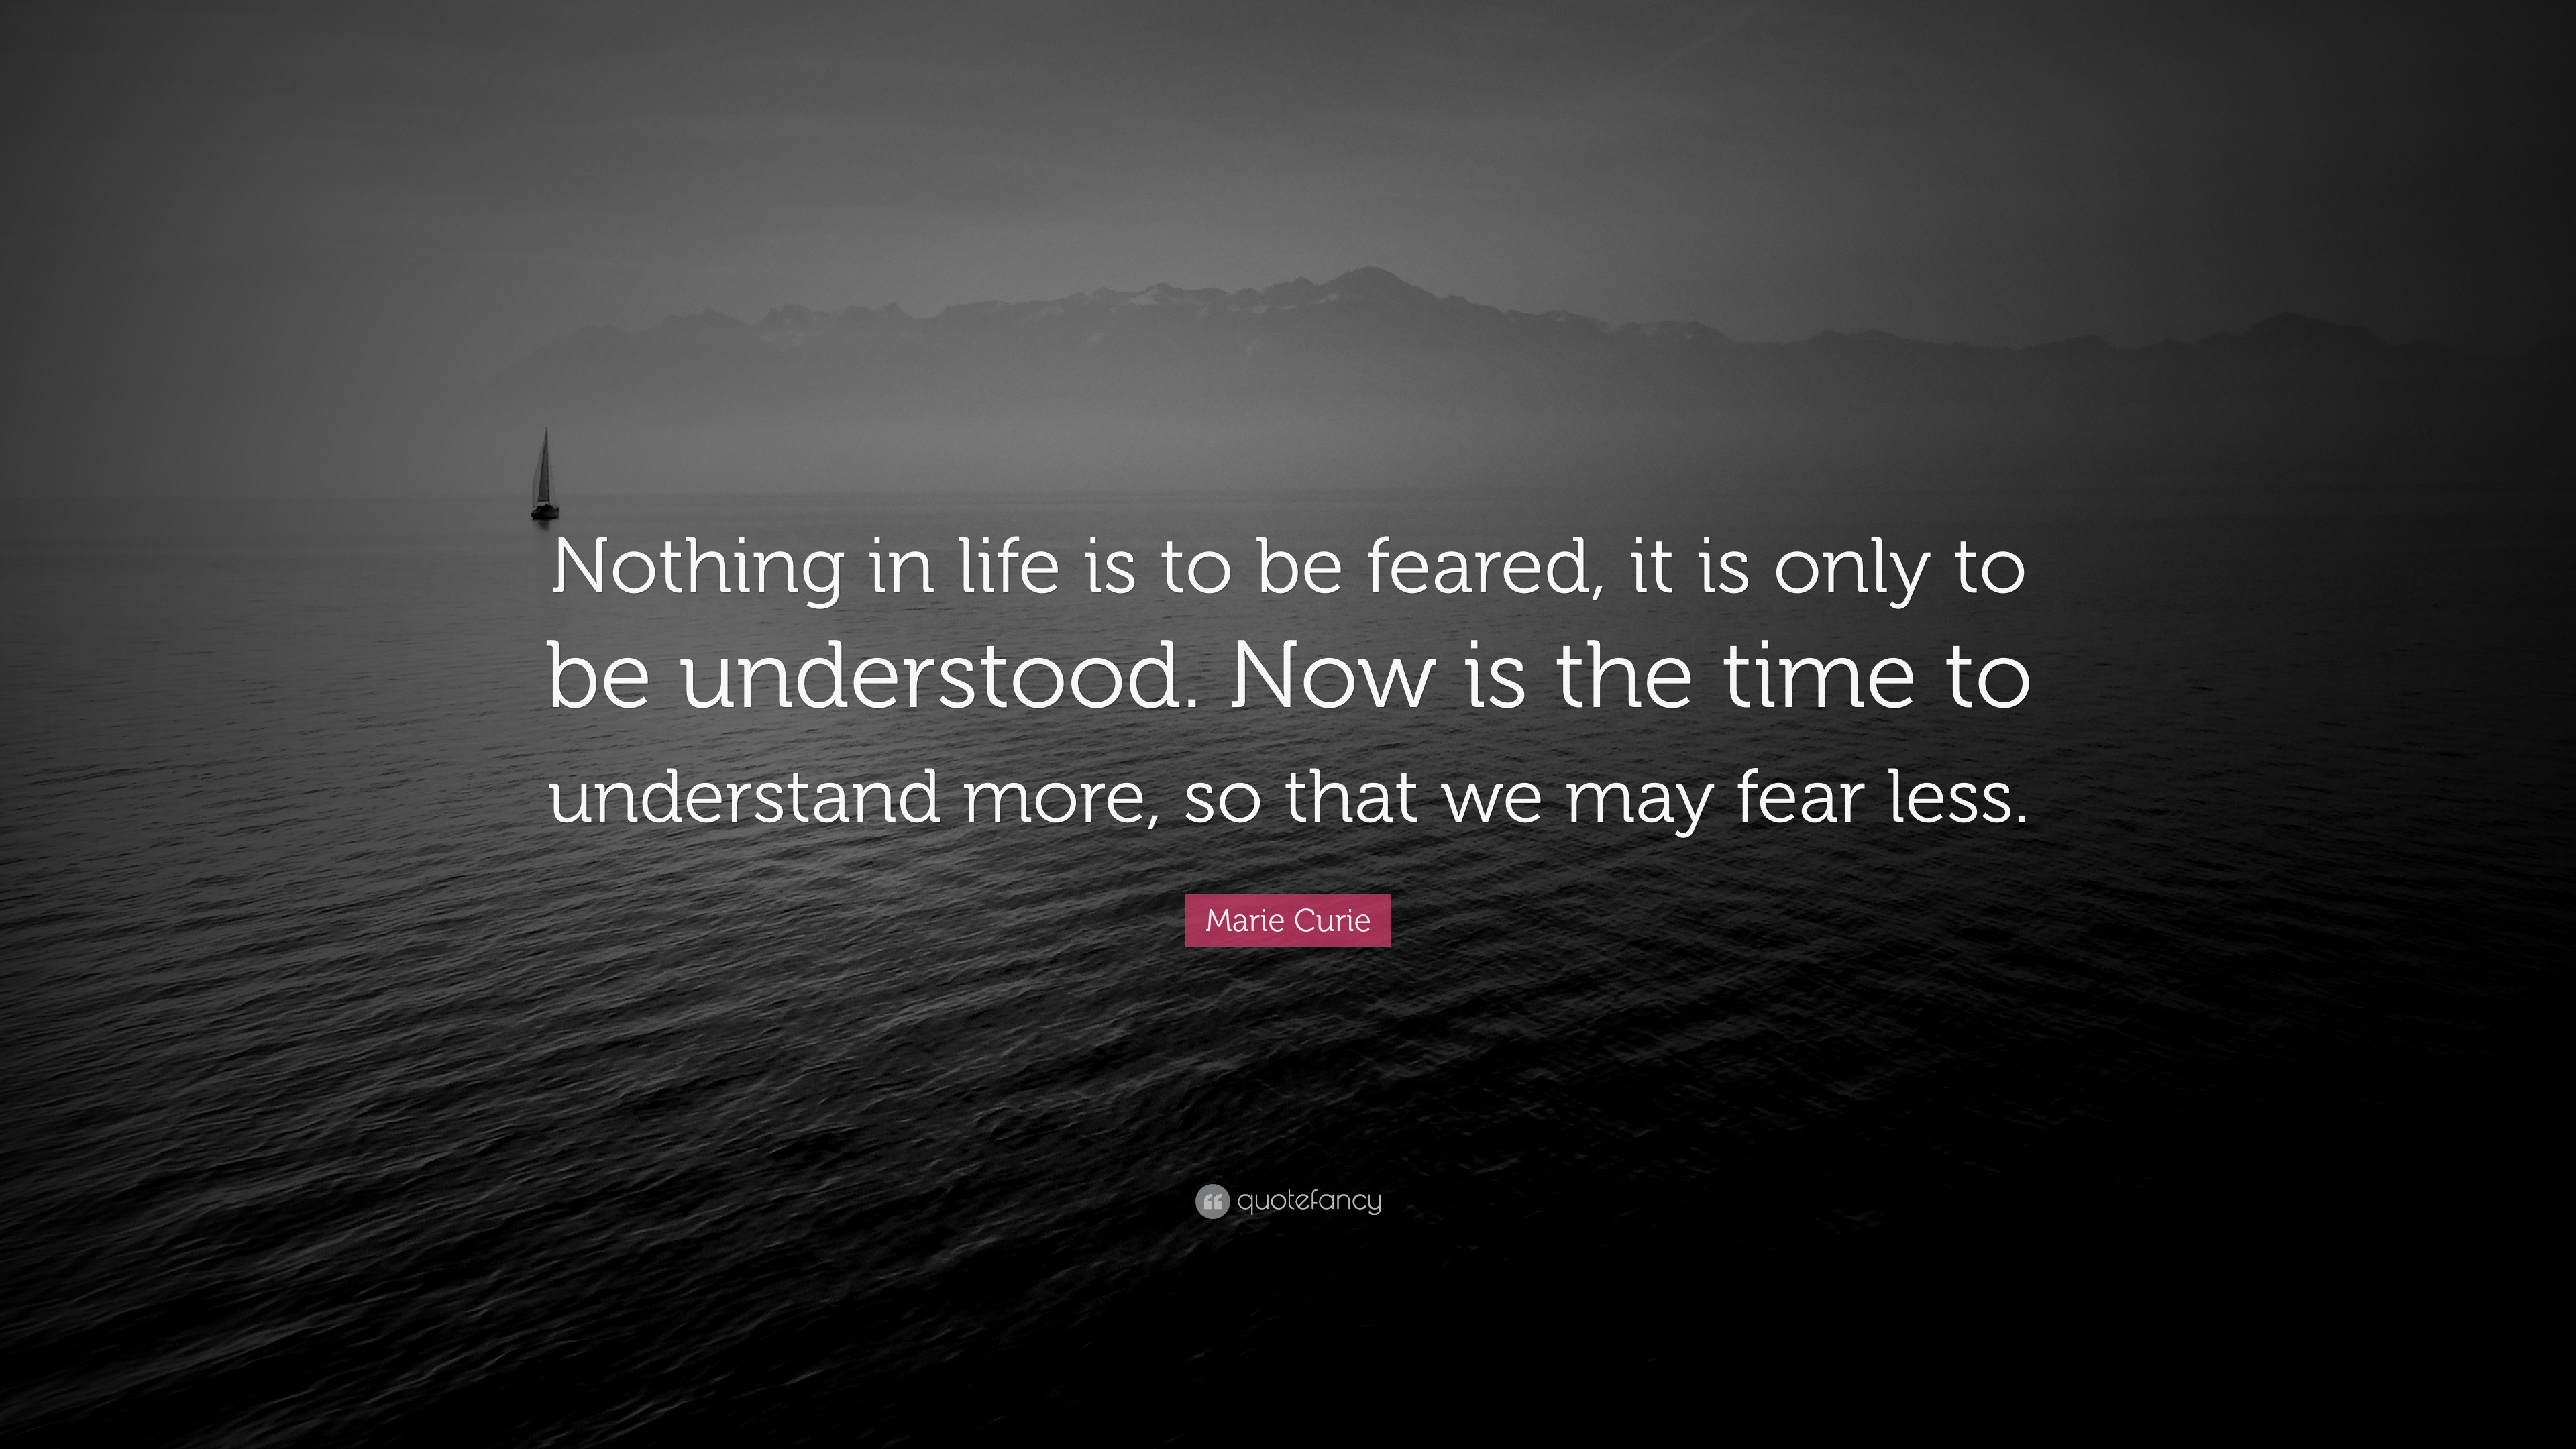 Marie Curie Quote: “Nothing in life is to be feared, it is only to be ...